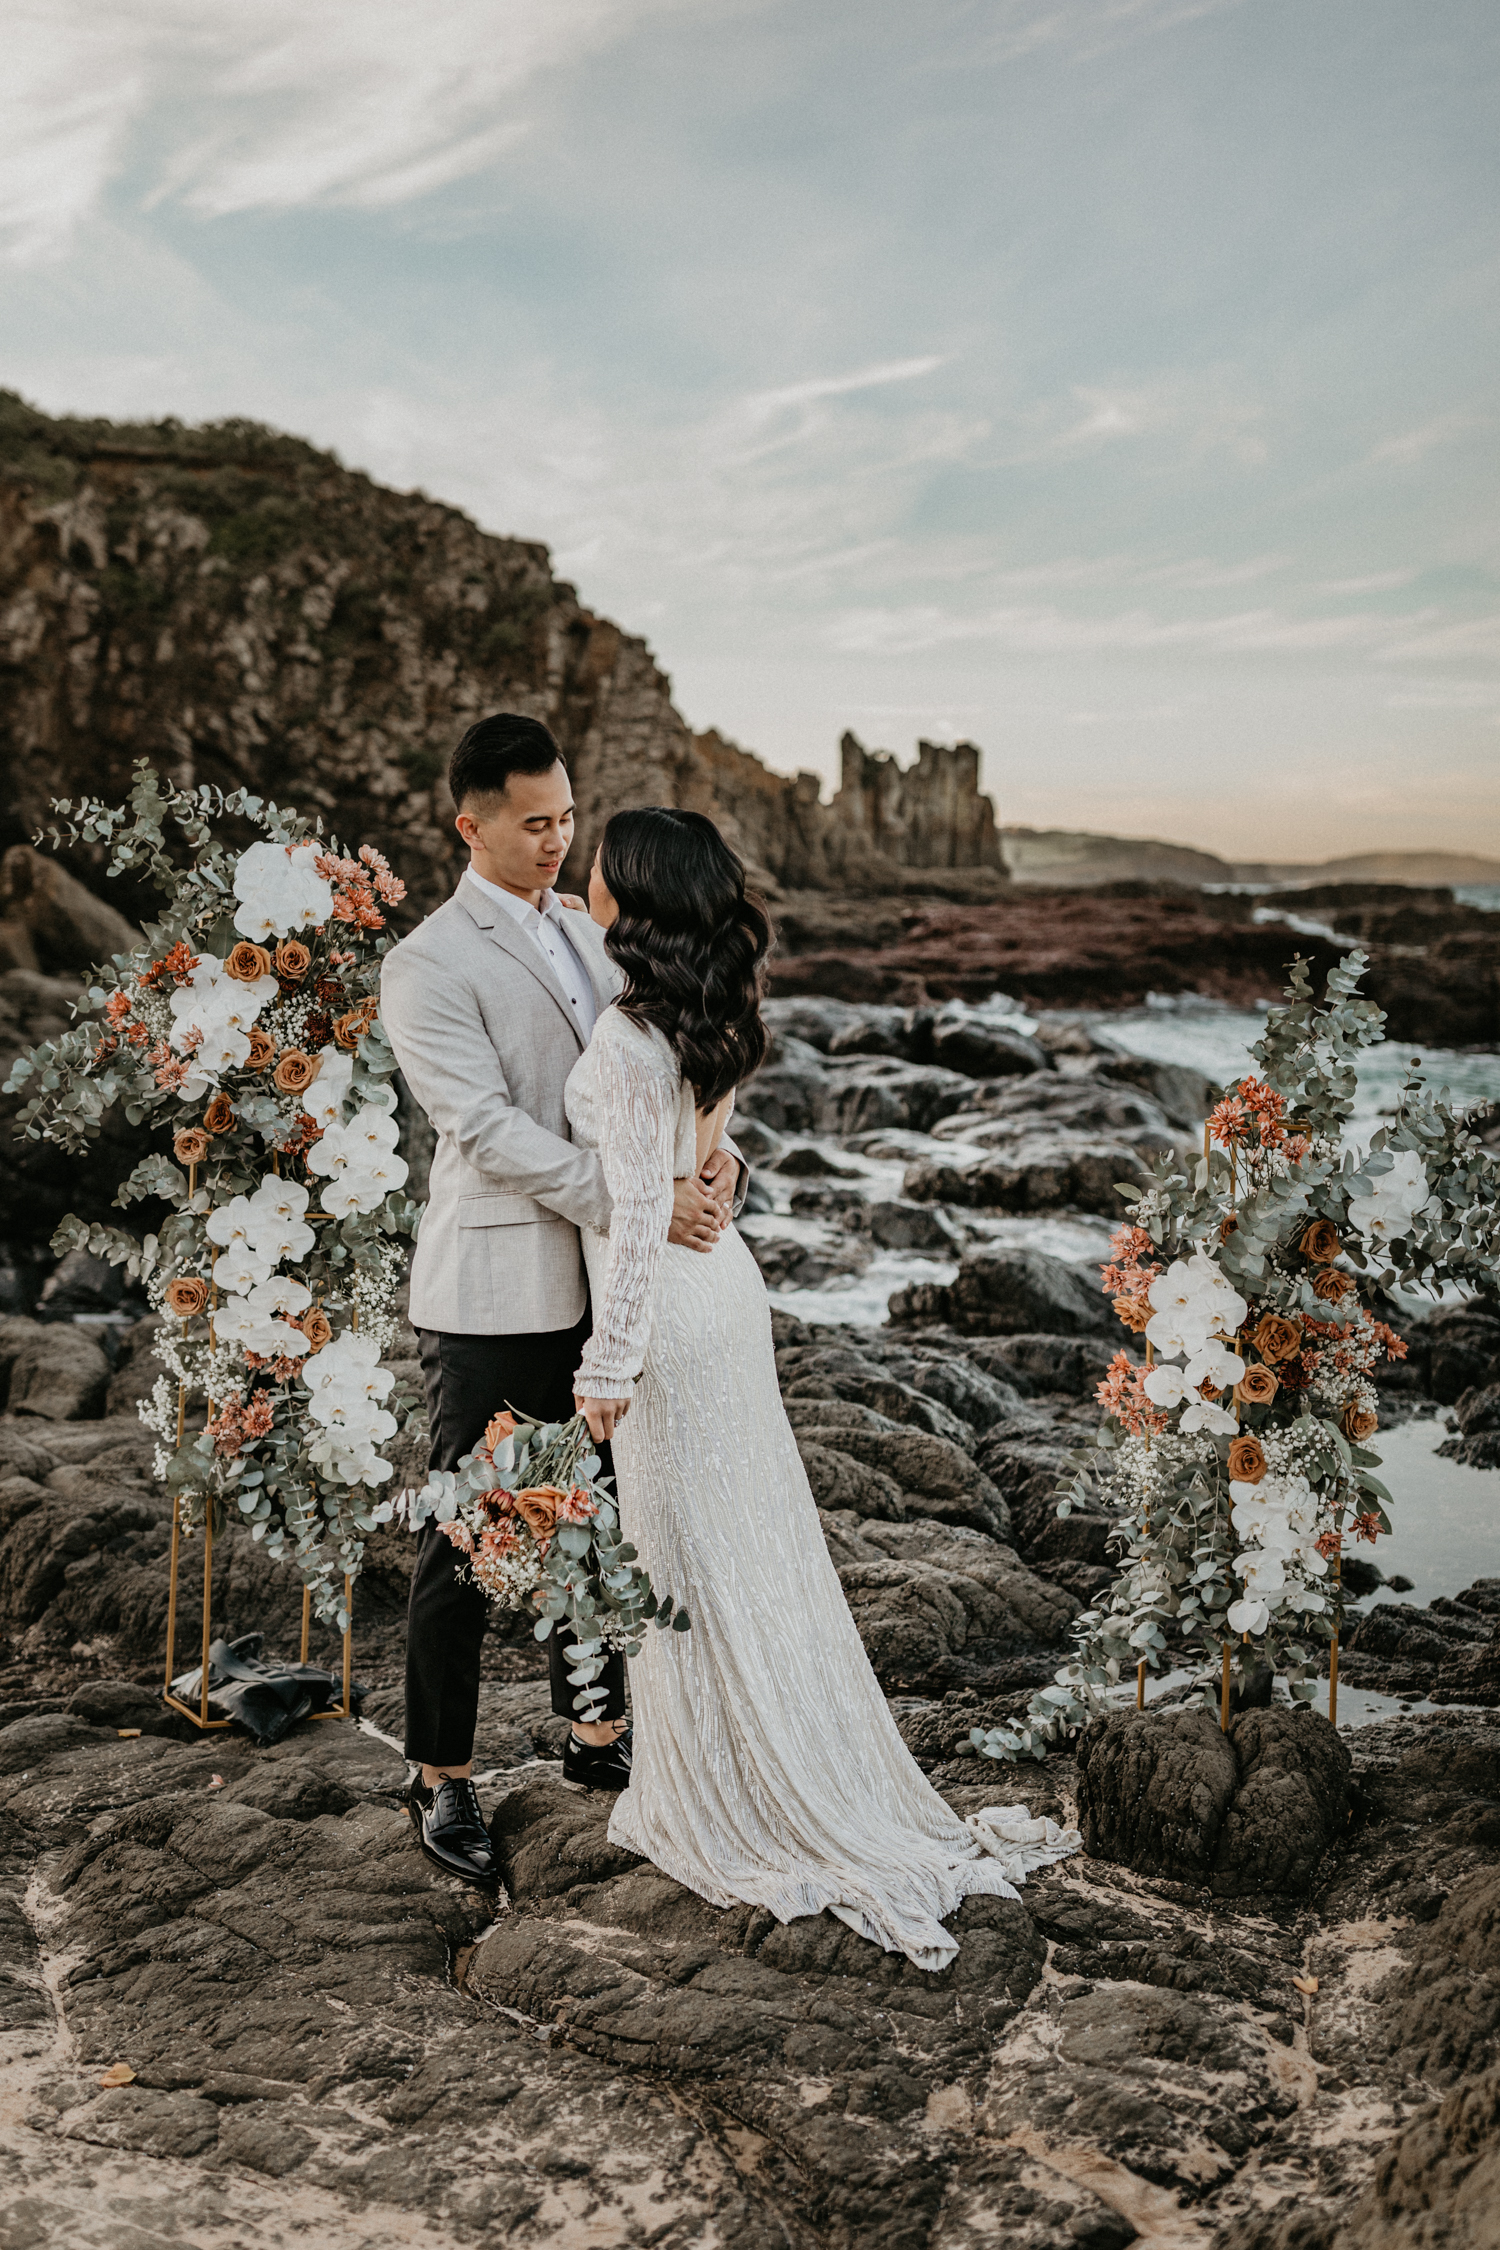 Romantic and Dreamy Sunset Elopement in South Coast, NSW